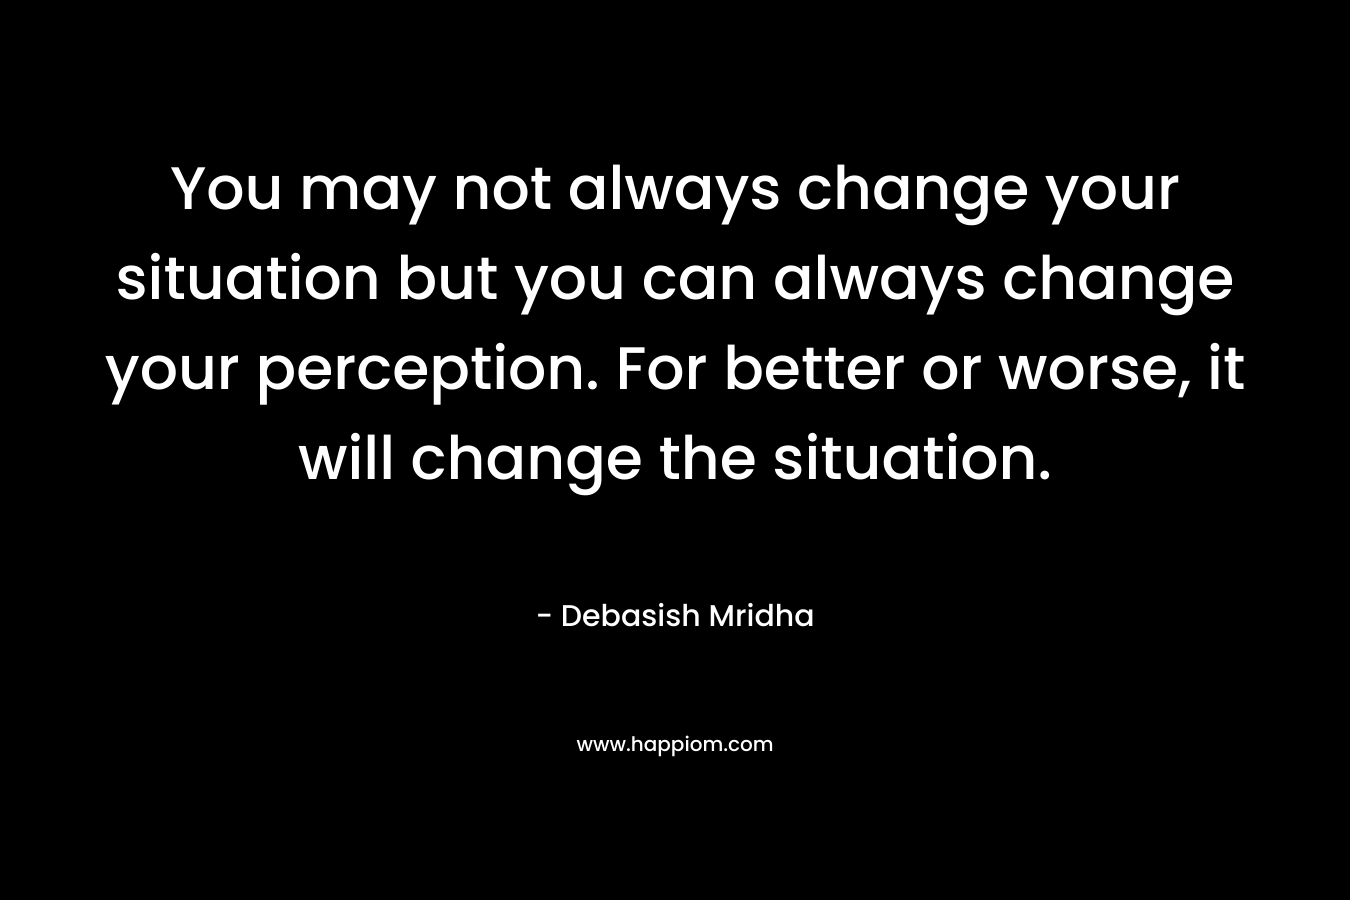 You may not always change your situation but you can always change your perception. For better or worse, it will change the situation.